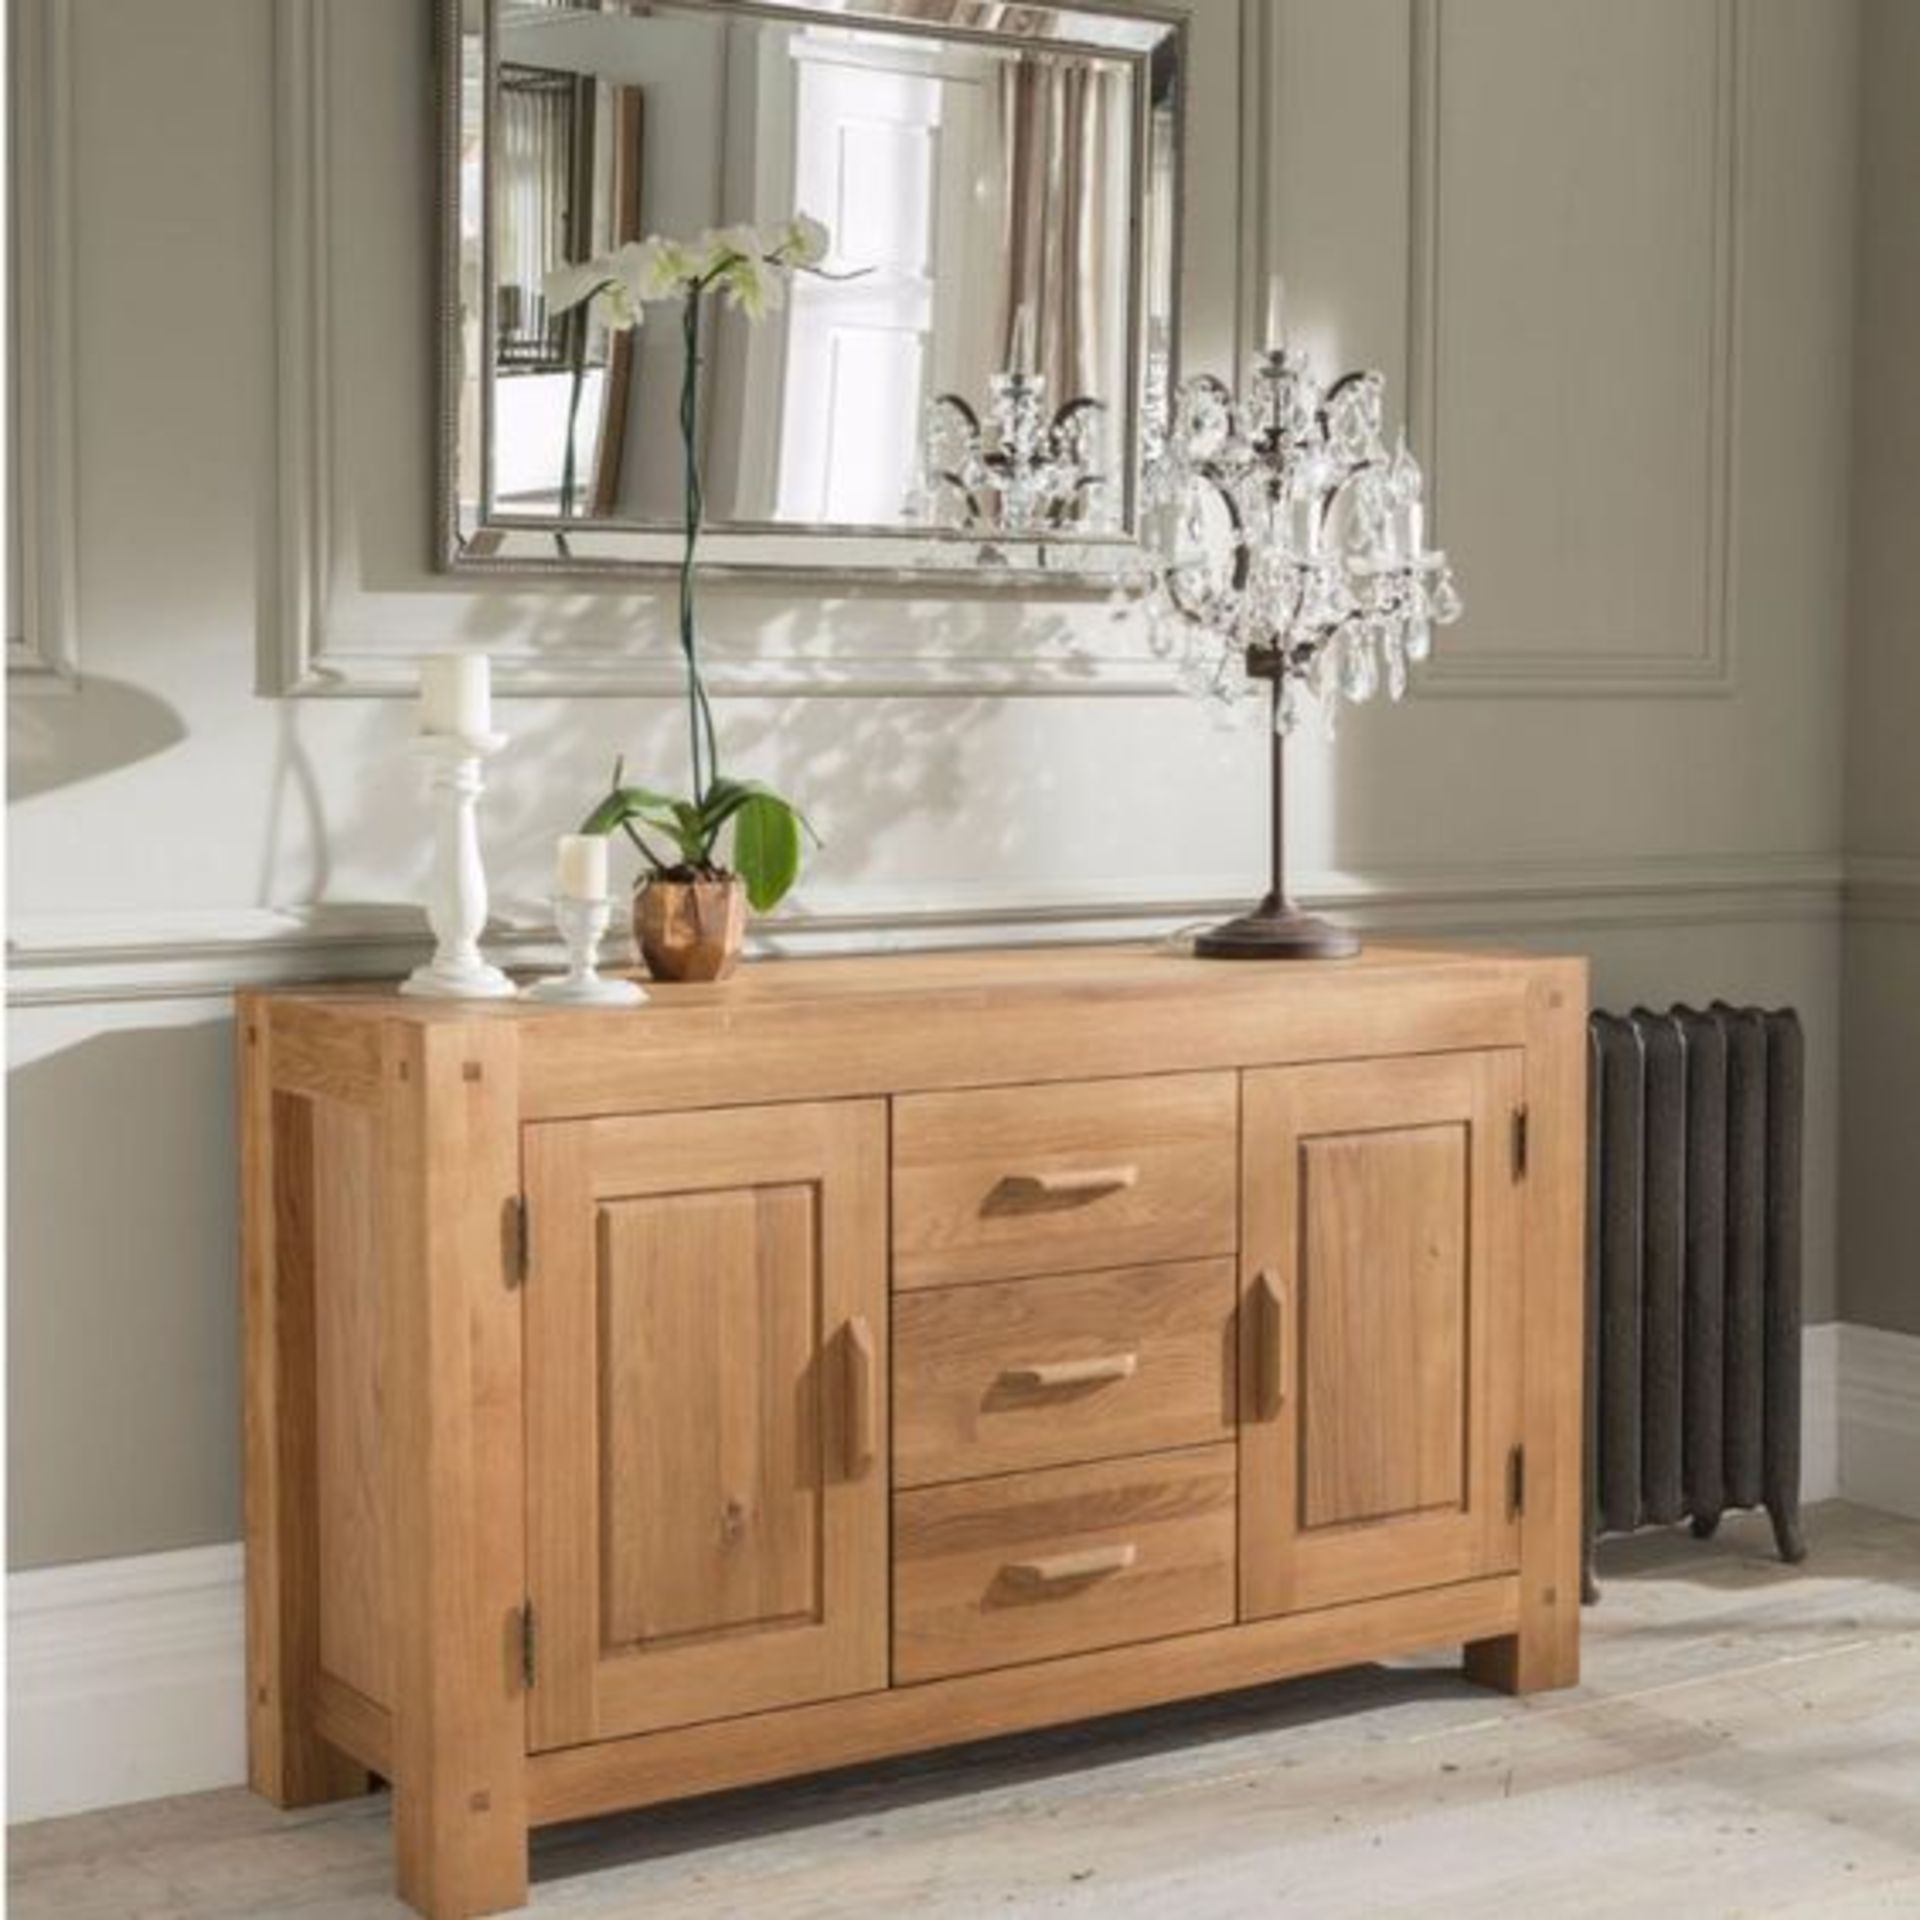 Oak Oregon 3 Drawer Sideboard Bursting With Rustic Charm, The Two Door Three Drawer Sideboard Is A